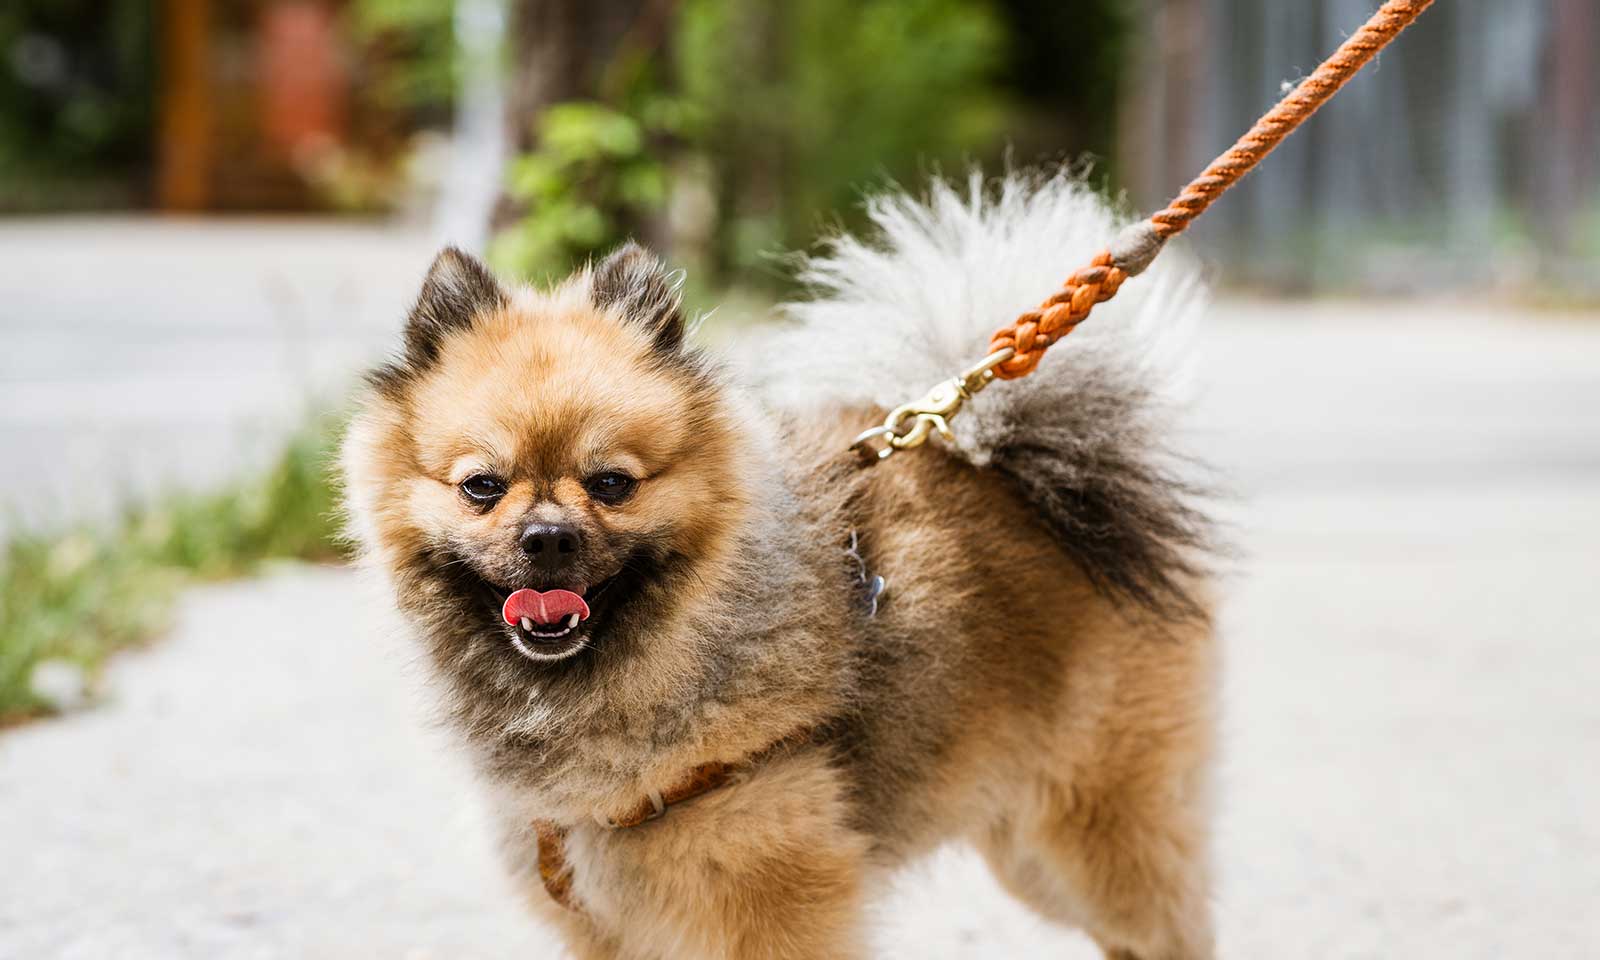 A Pomeranian out for a walk